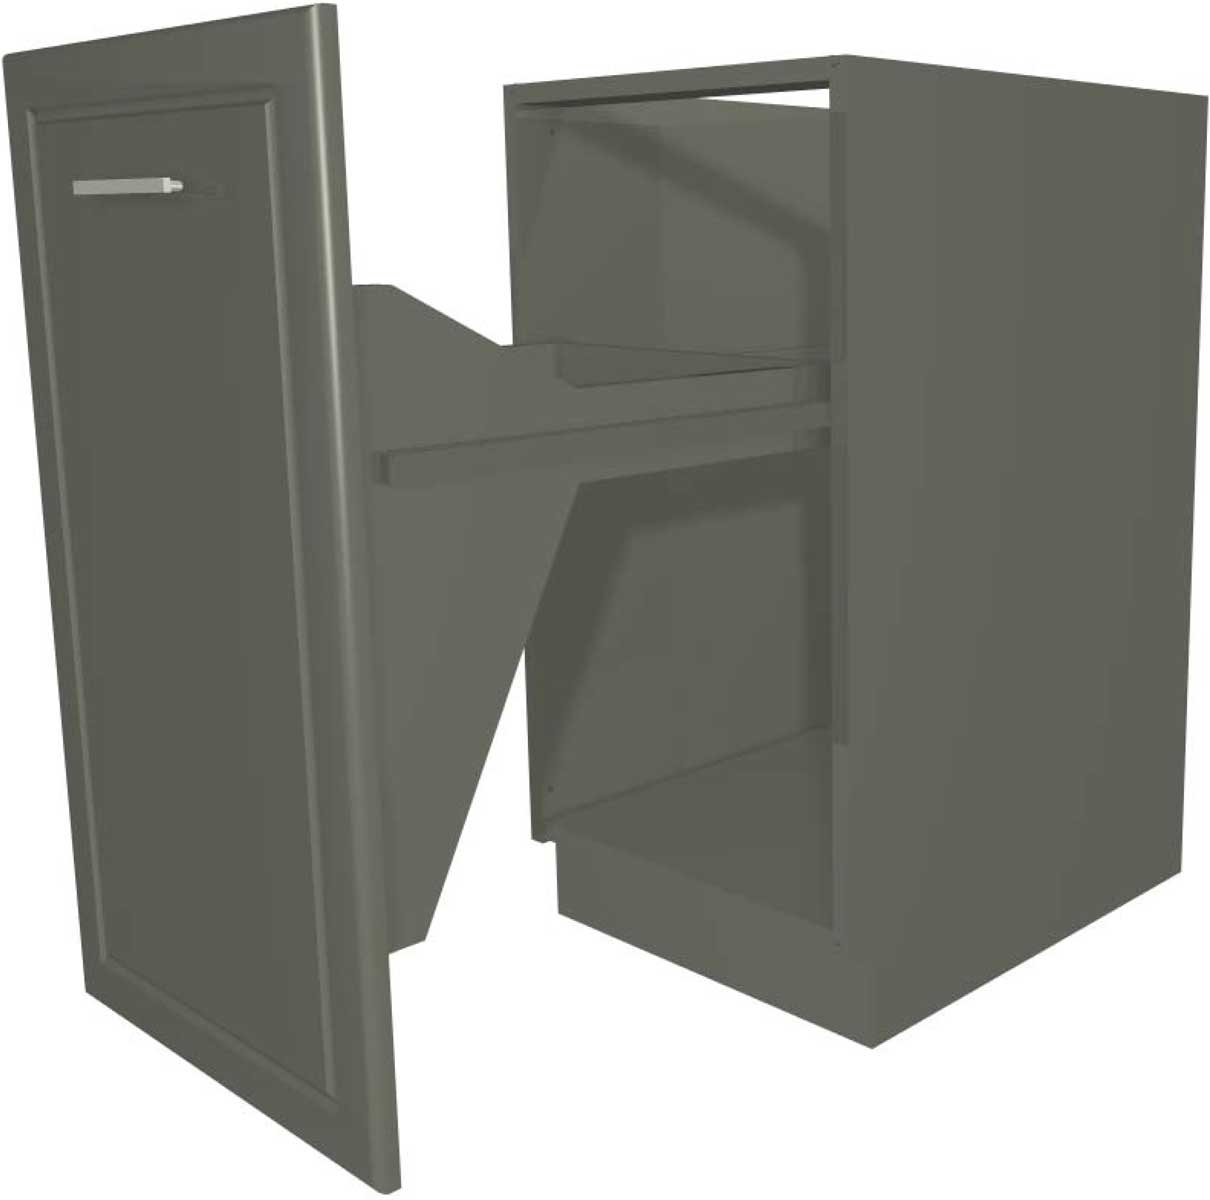 pull-out-trash-cabinet-full-height-door-open